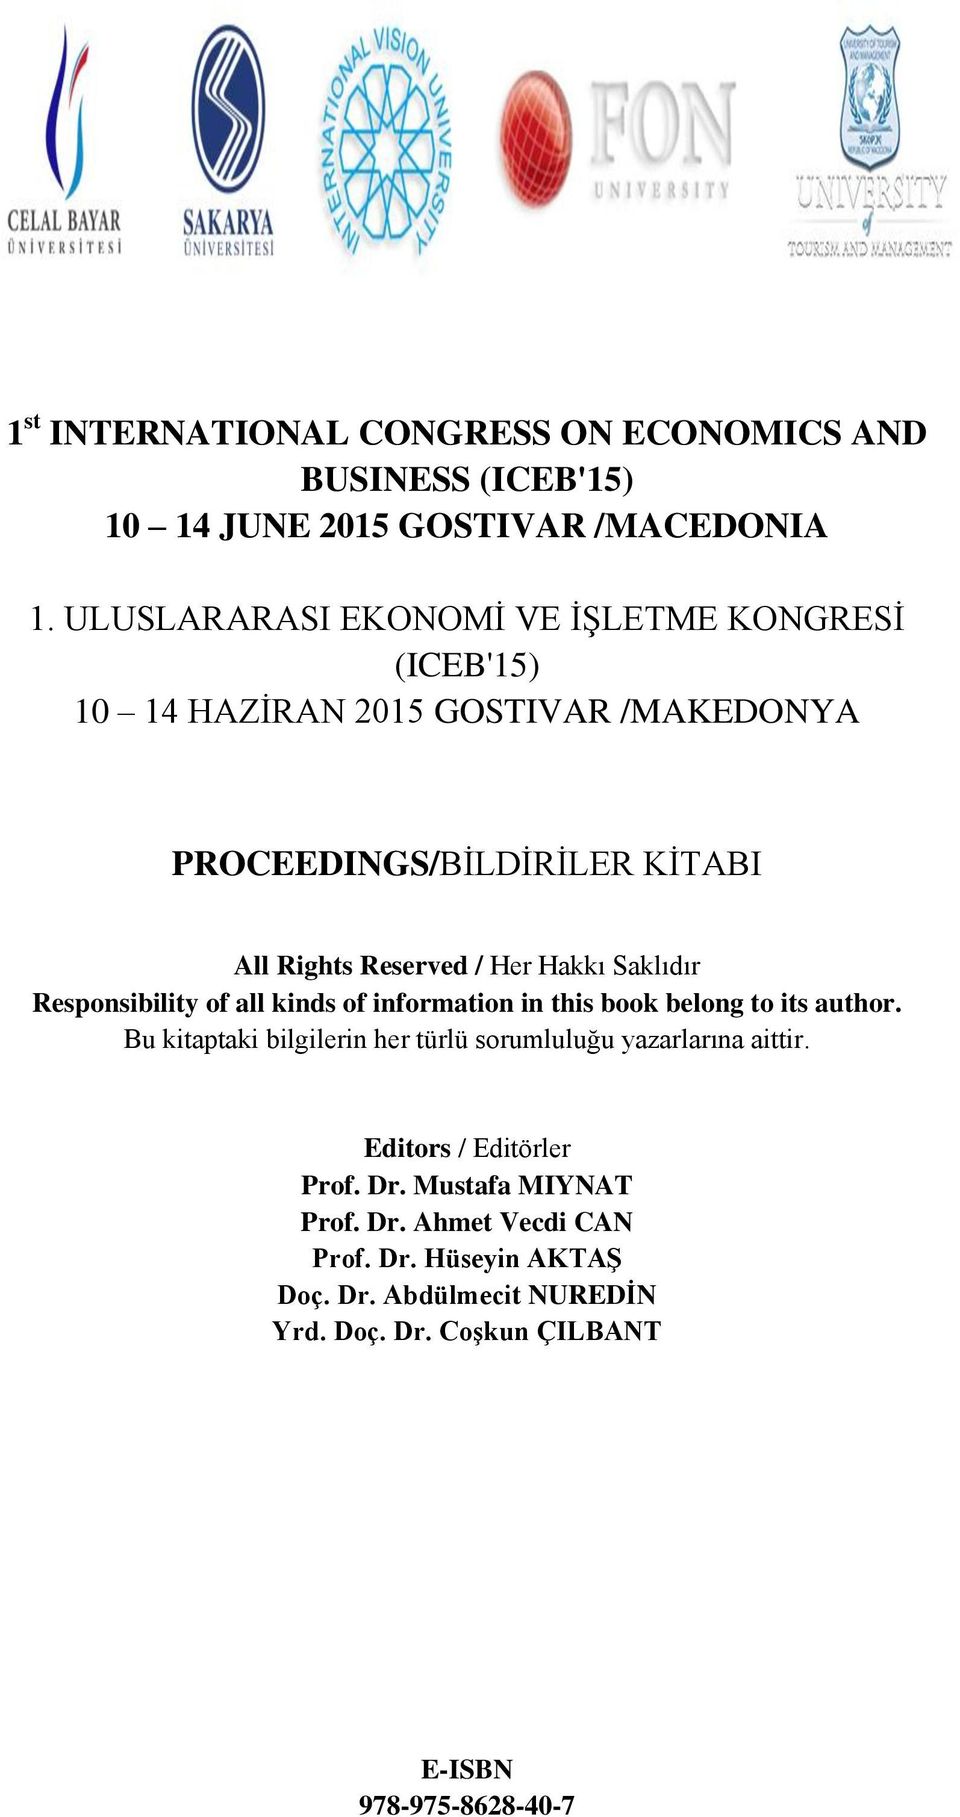 Hakkı Saklıdır Responsibility of all kinds of information in this book belong to its author.